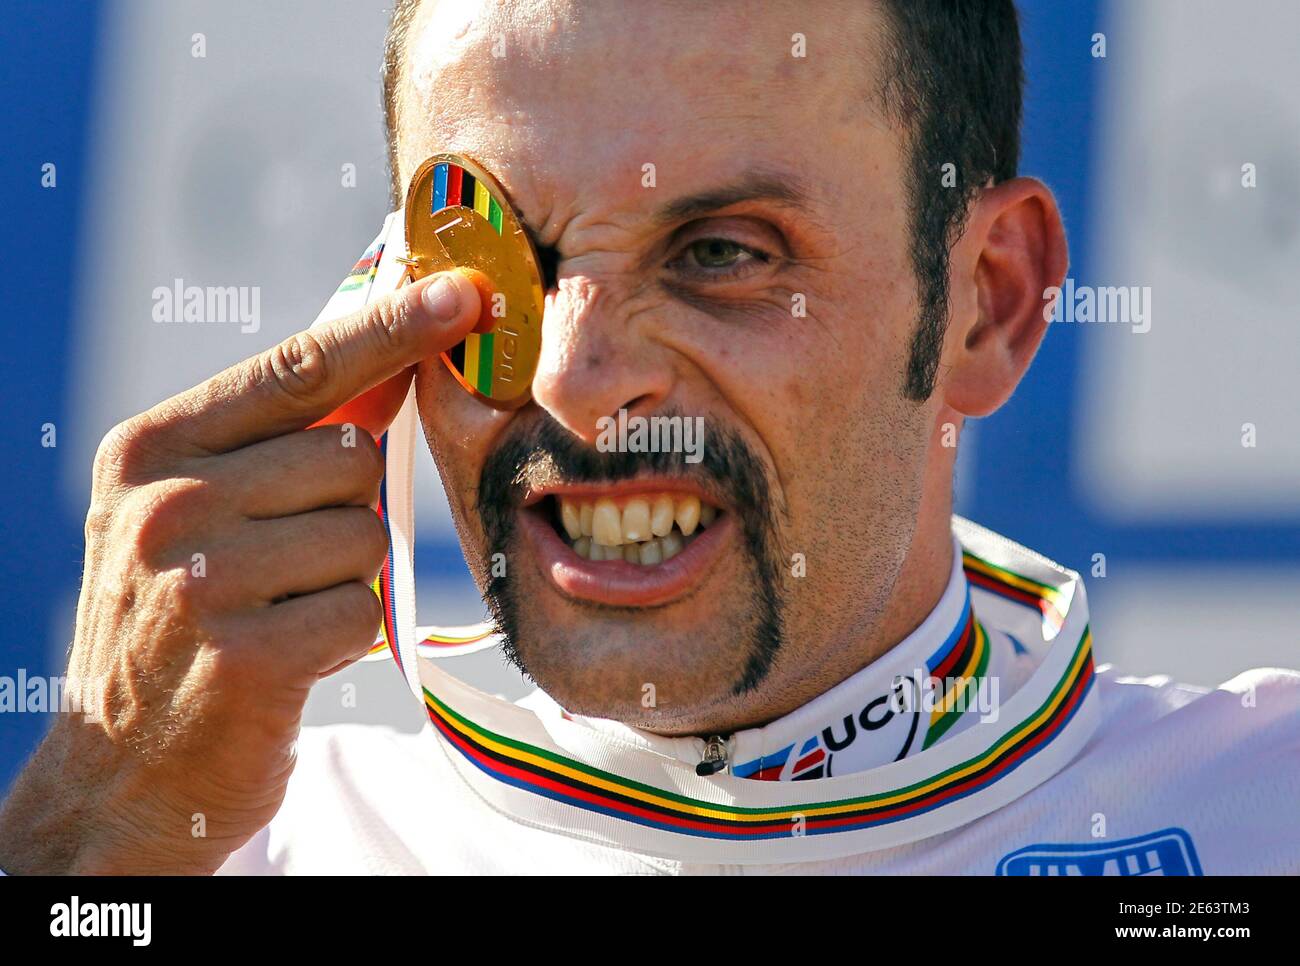 Spain's Jose Antonio Hermida Ramos covers his eye with his medal after  winning the men's cross country at the UCI Mountain Bike World  Championships in Mount Ste-Anne, Beaupre, September 4, 2010. REUTERS/Mathieu